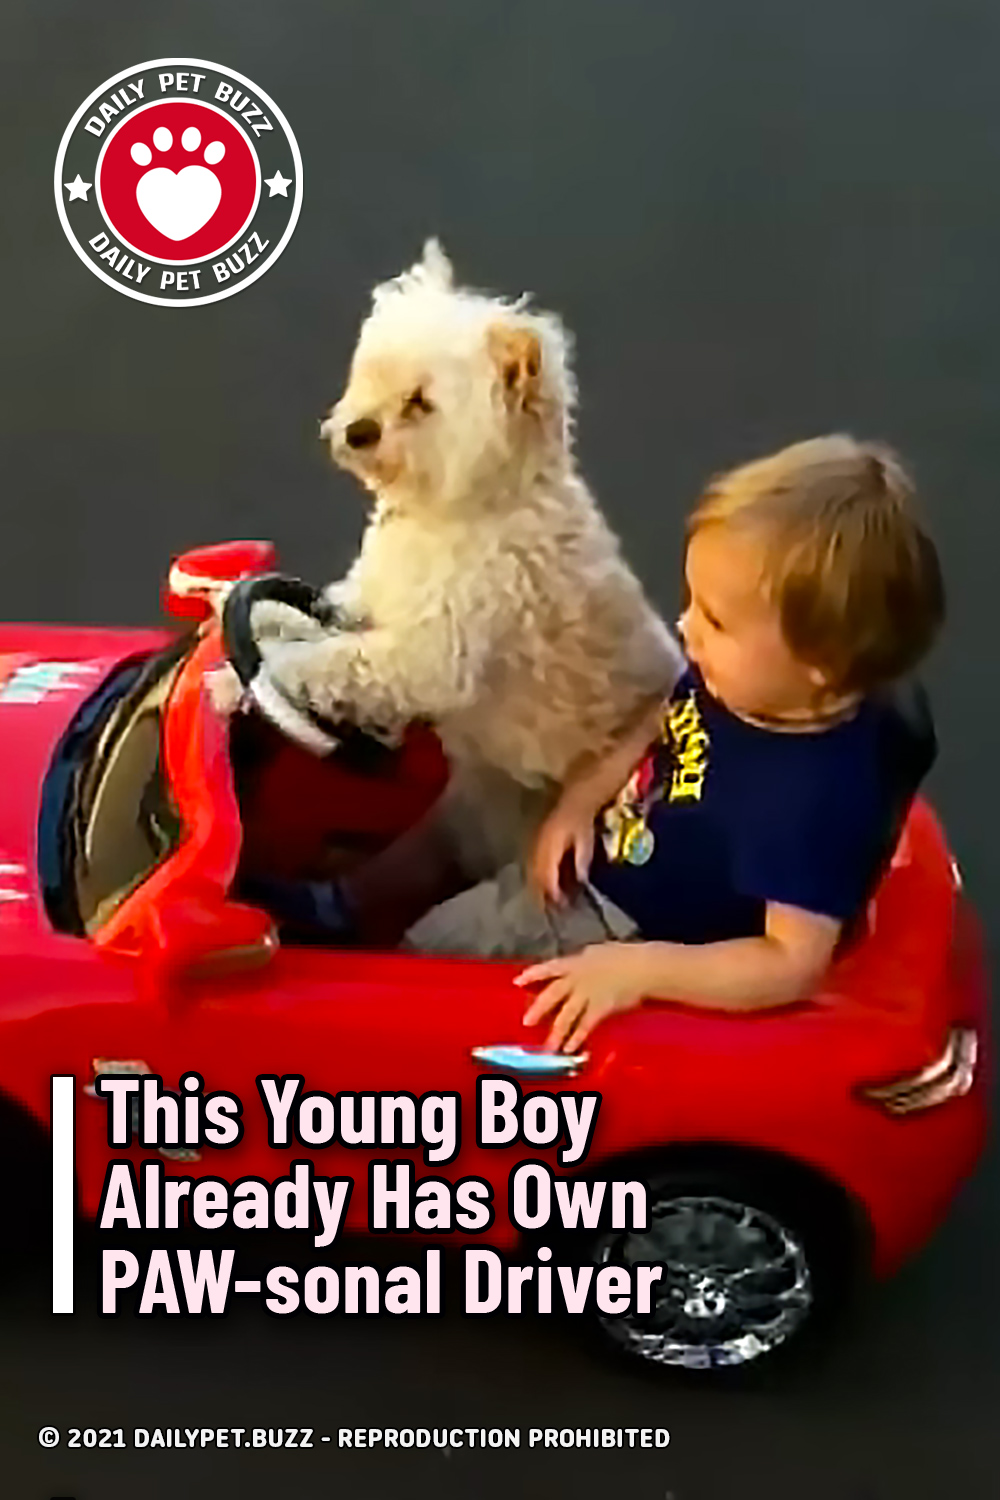 This Young Boy Already Has Own PAW-sonal Driver